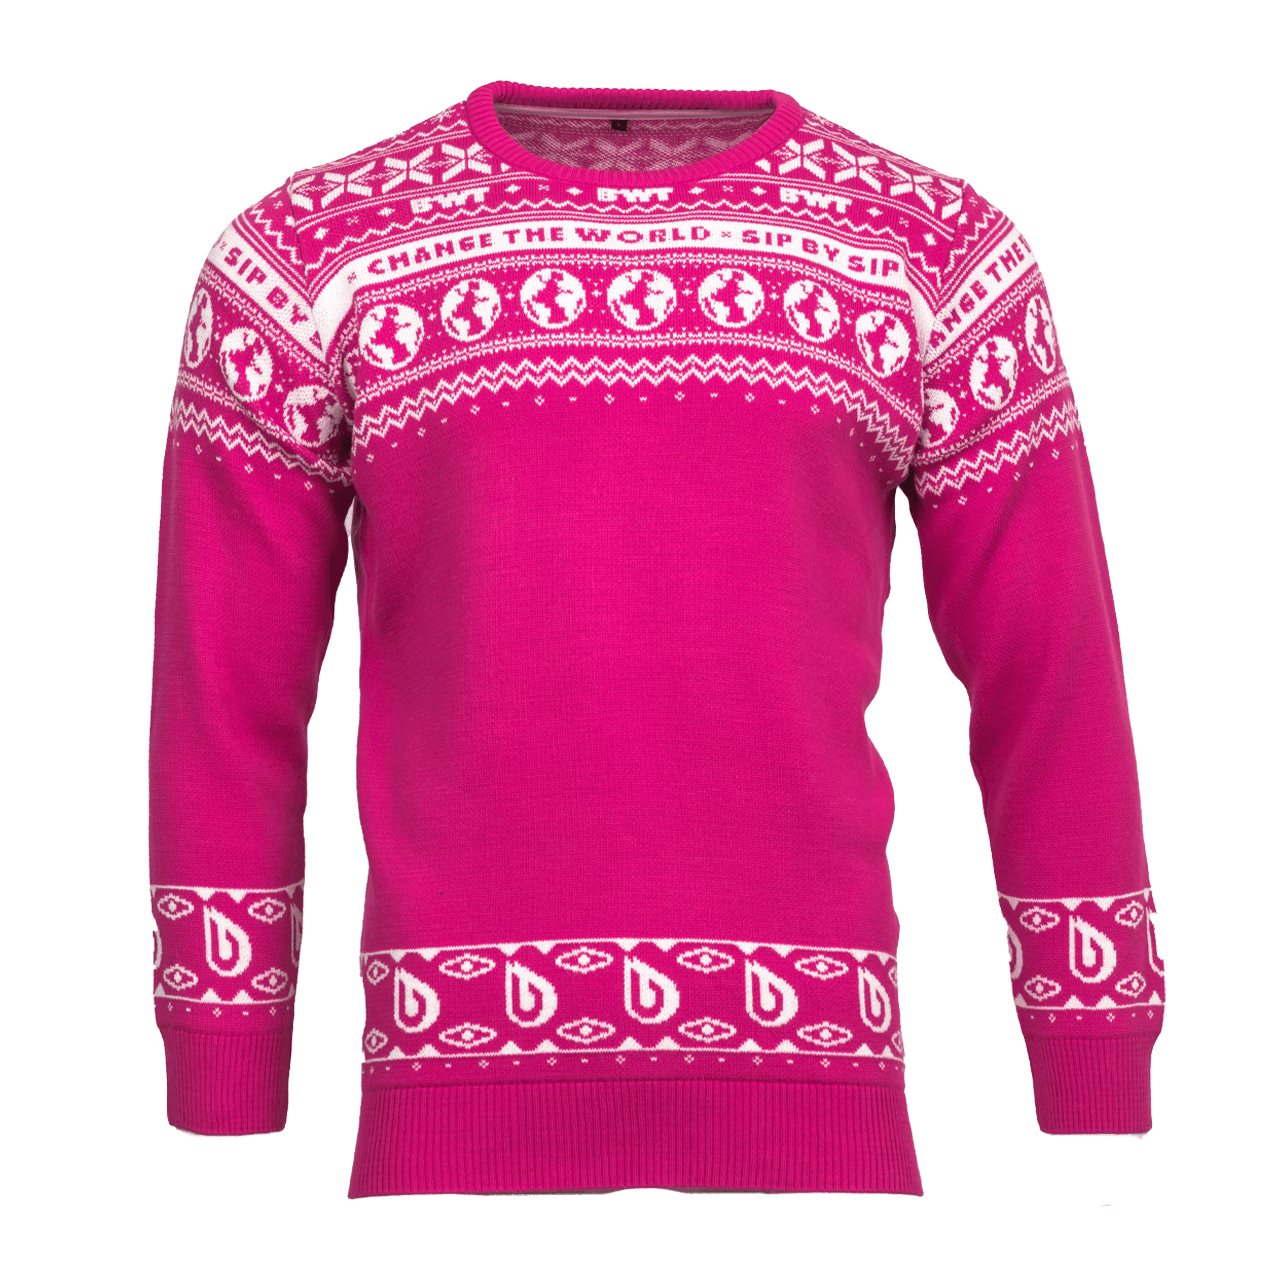 BWT XMAS knitted jumper in magenta with white pattern